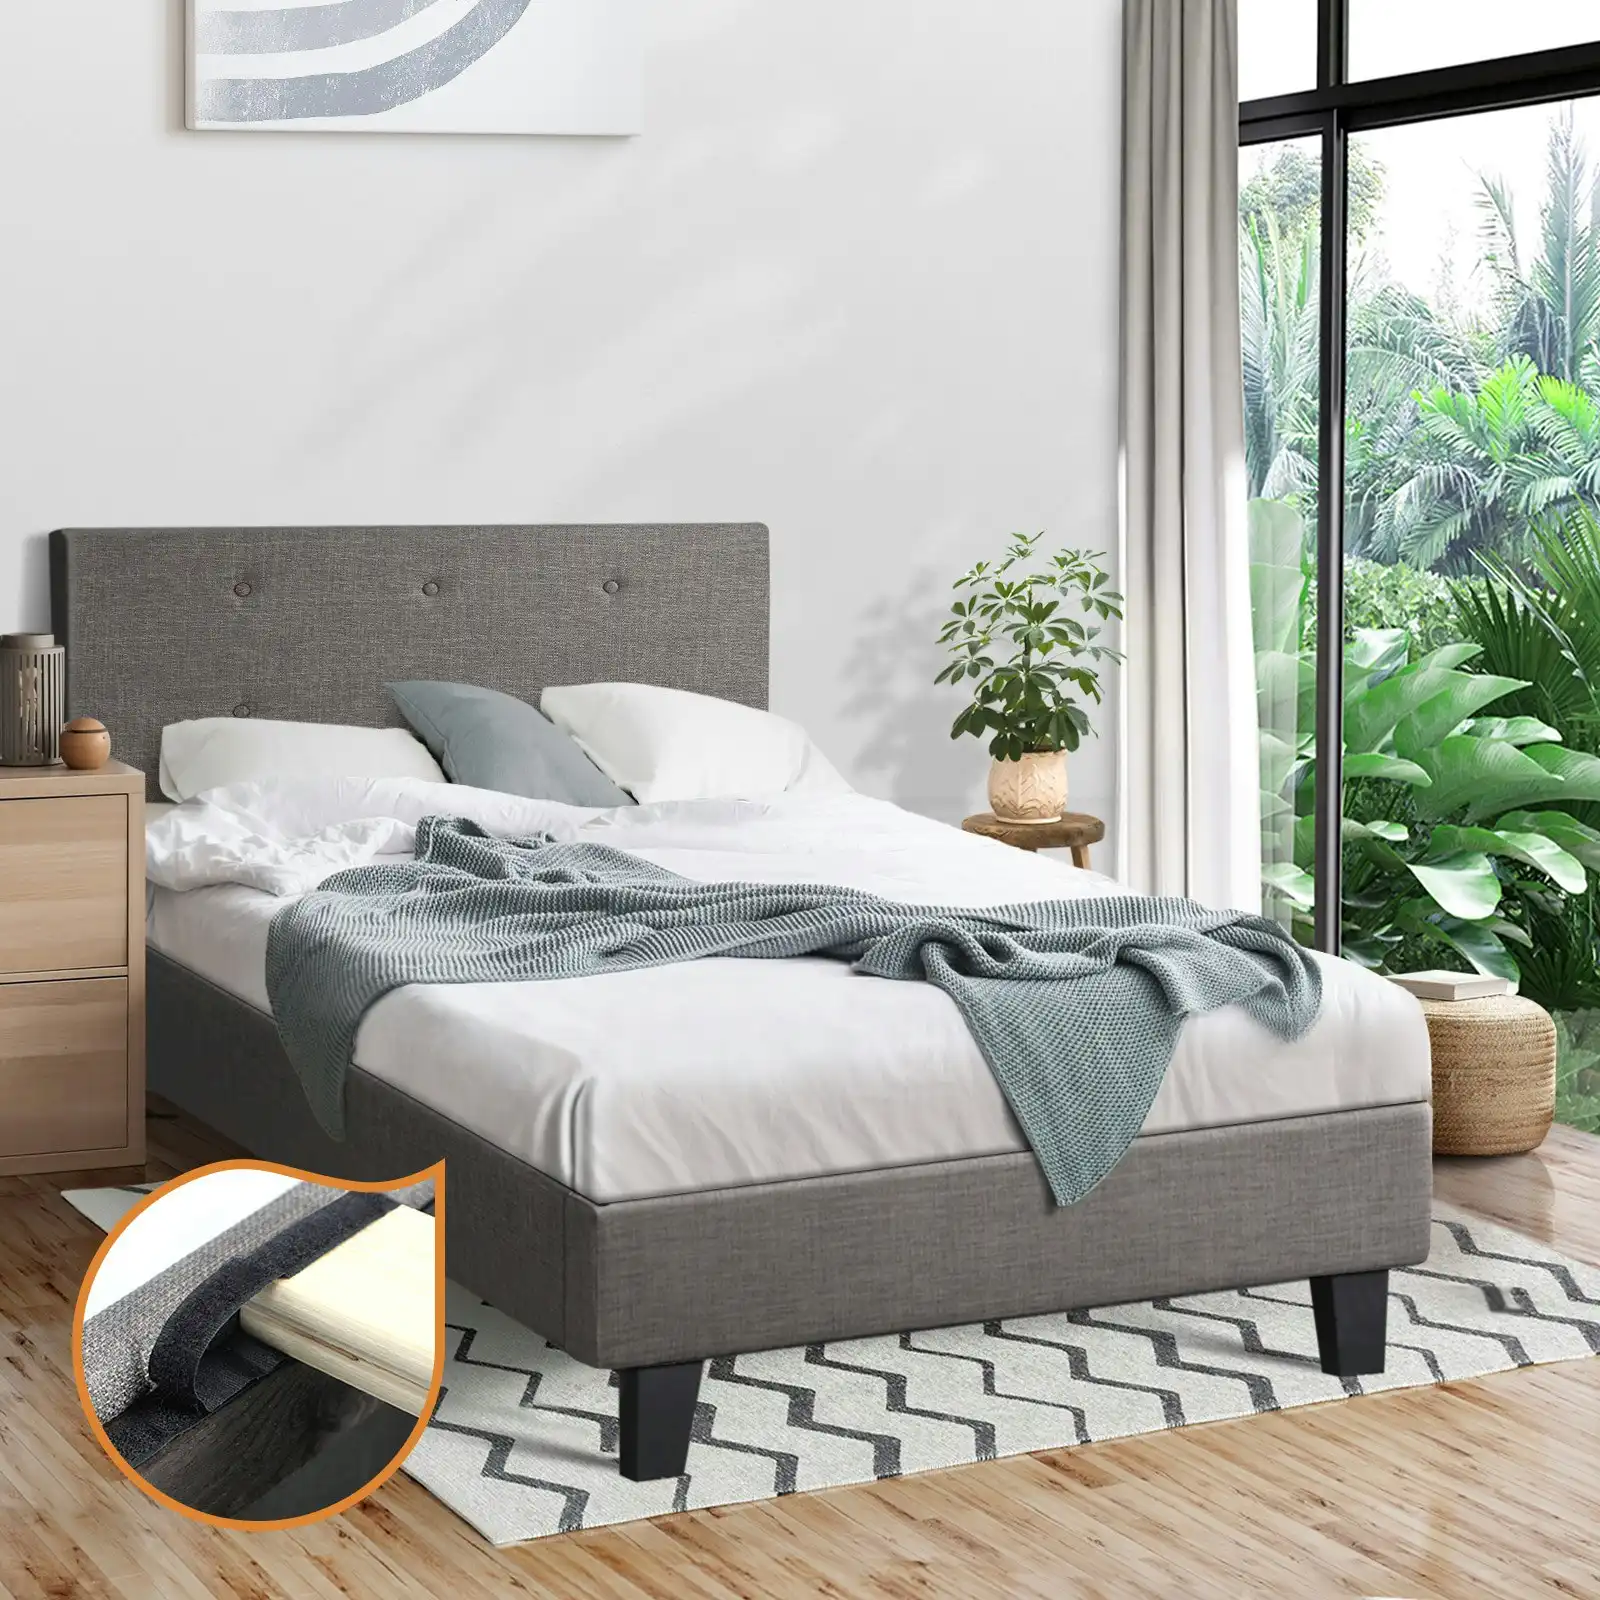 Oikiture Bed Frame Single Size Bed Platform Wooden Fabric Grey